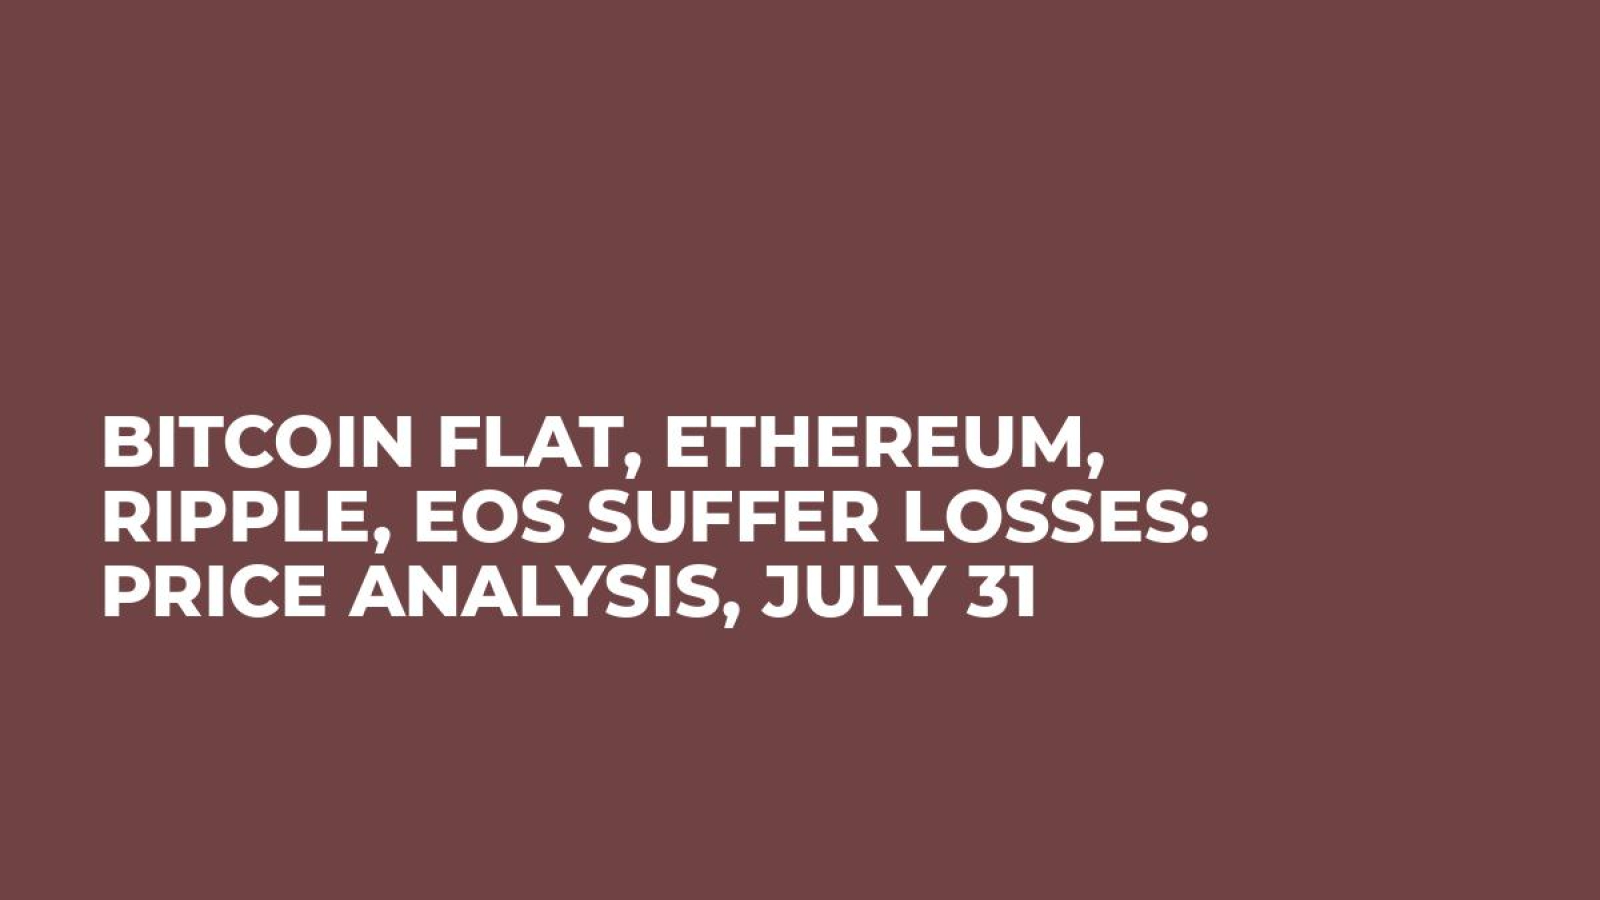 Bitcoin Flat, Ethereum, Ripple, EOS Suffer Losses: Price Analysis, July 31